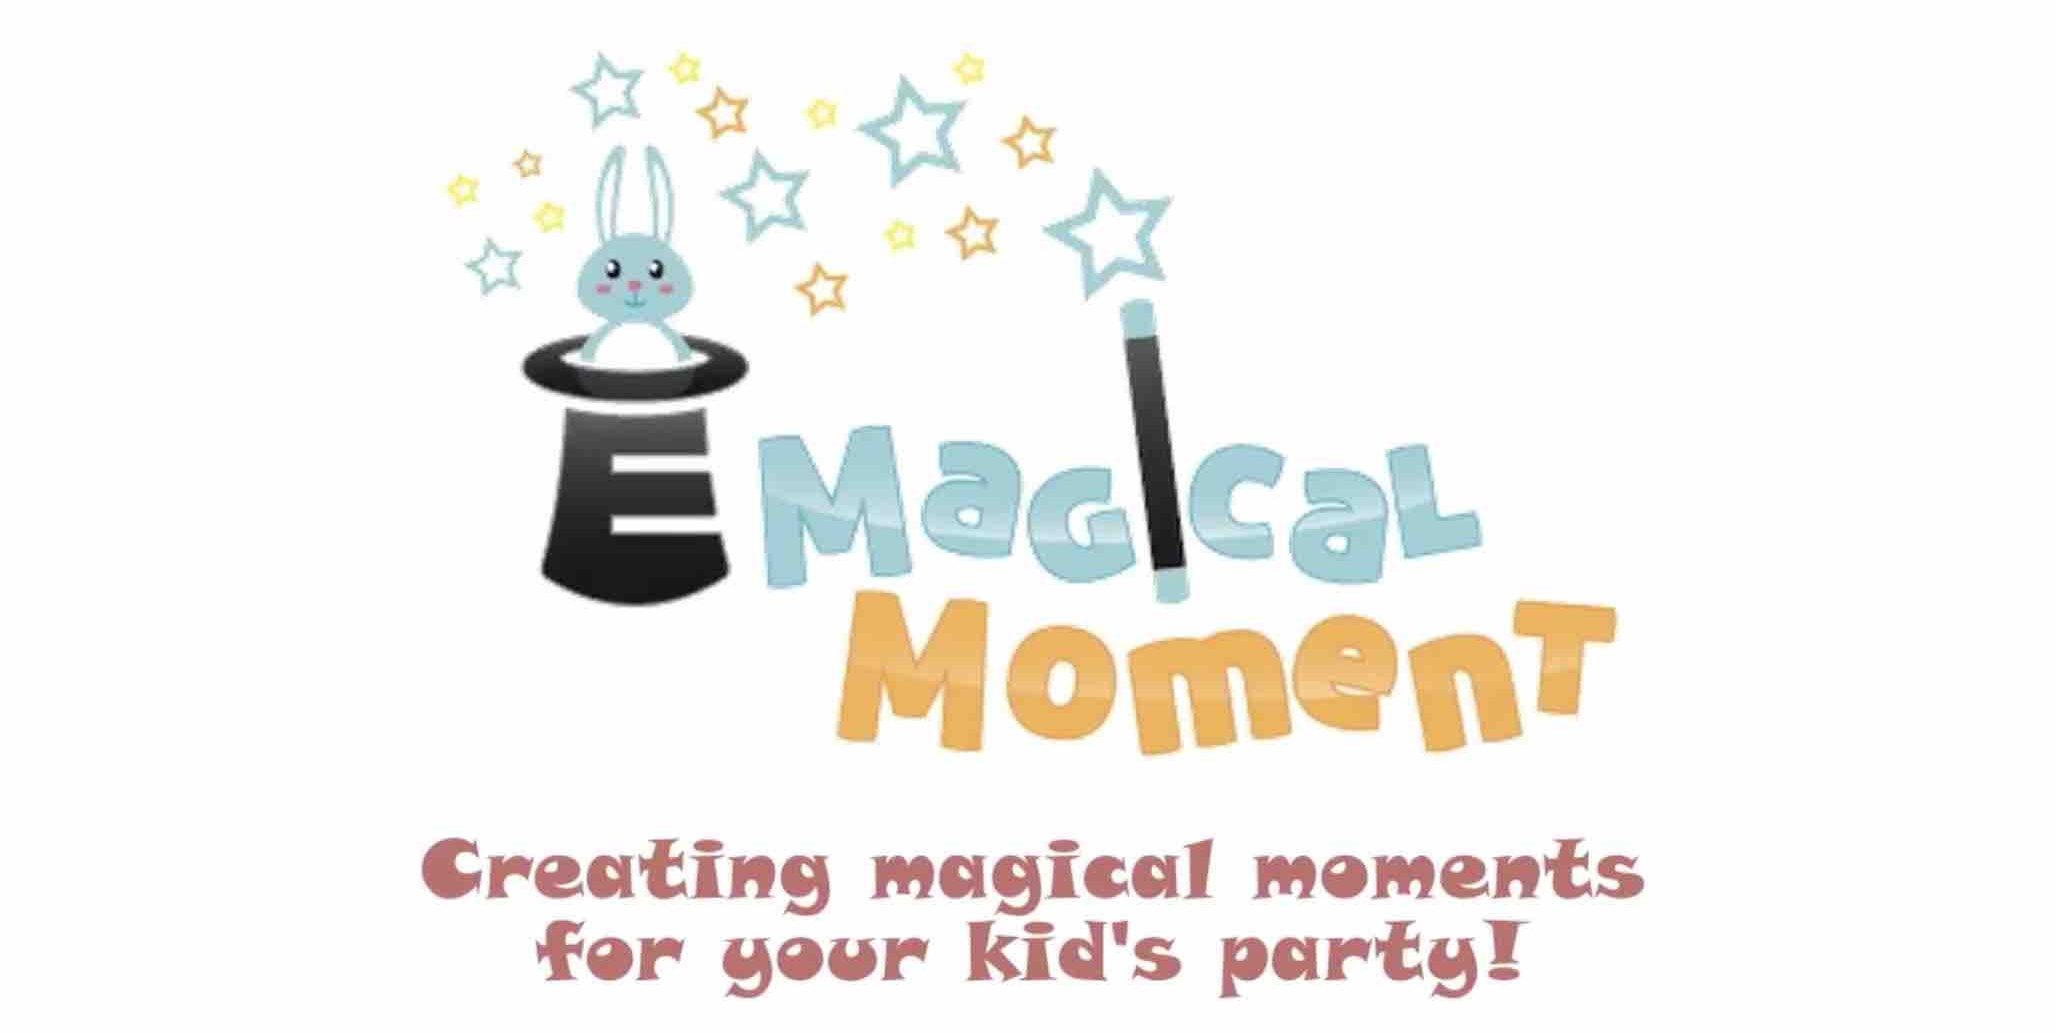 E Magical Moment Singapore Stand to Win $350 Birthday Party Contest ends 8 Feb 2018